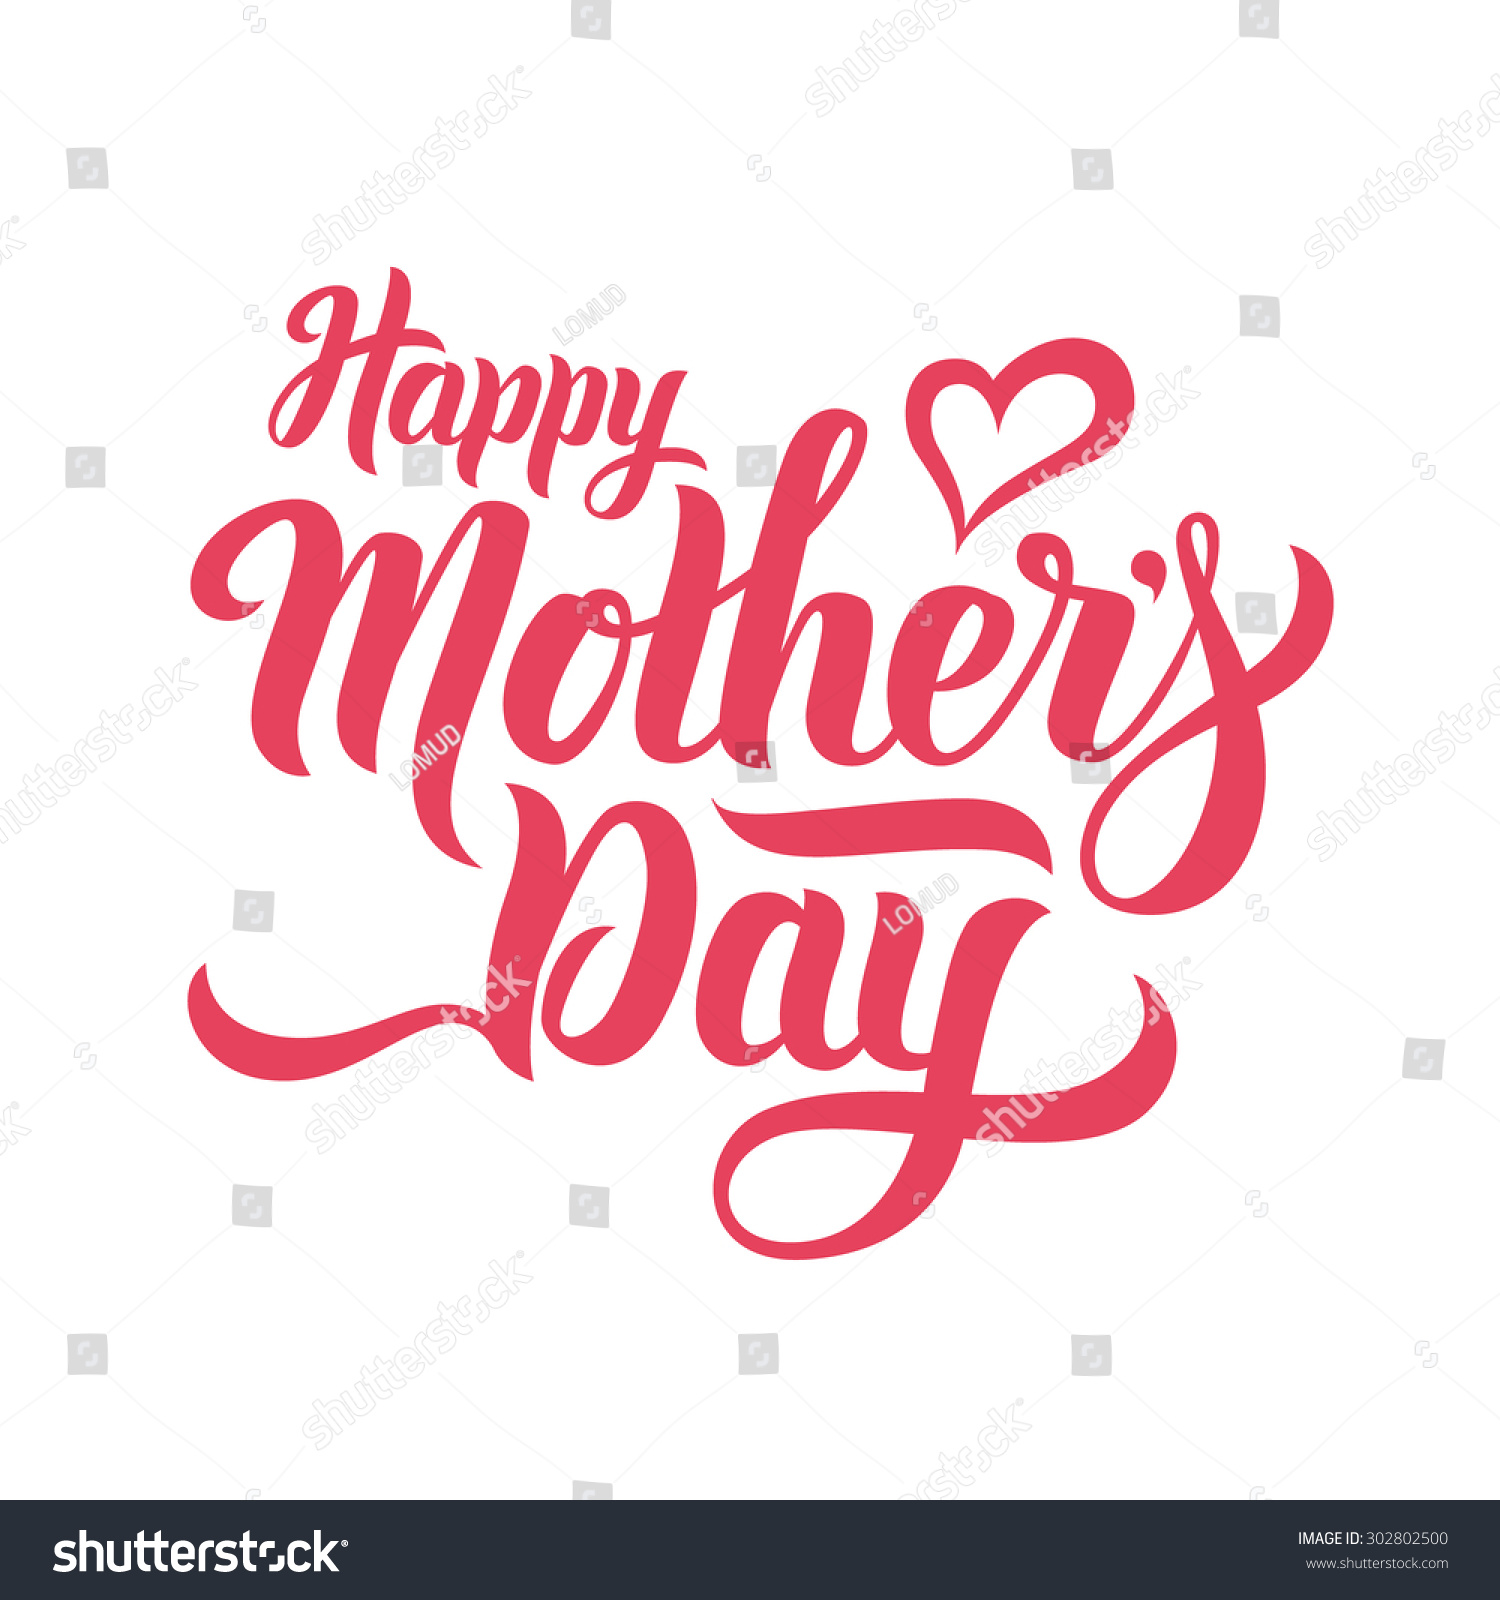 Download Happy Mothers Day Lettering Handmade Calligraphy Stock ...